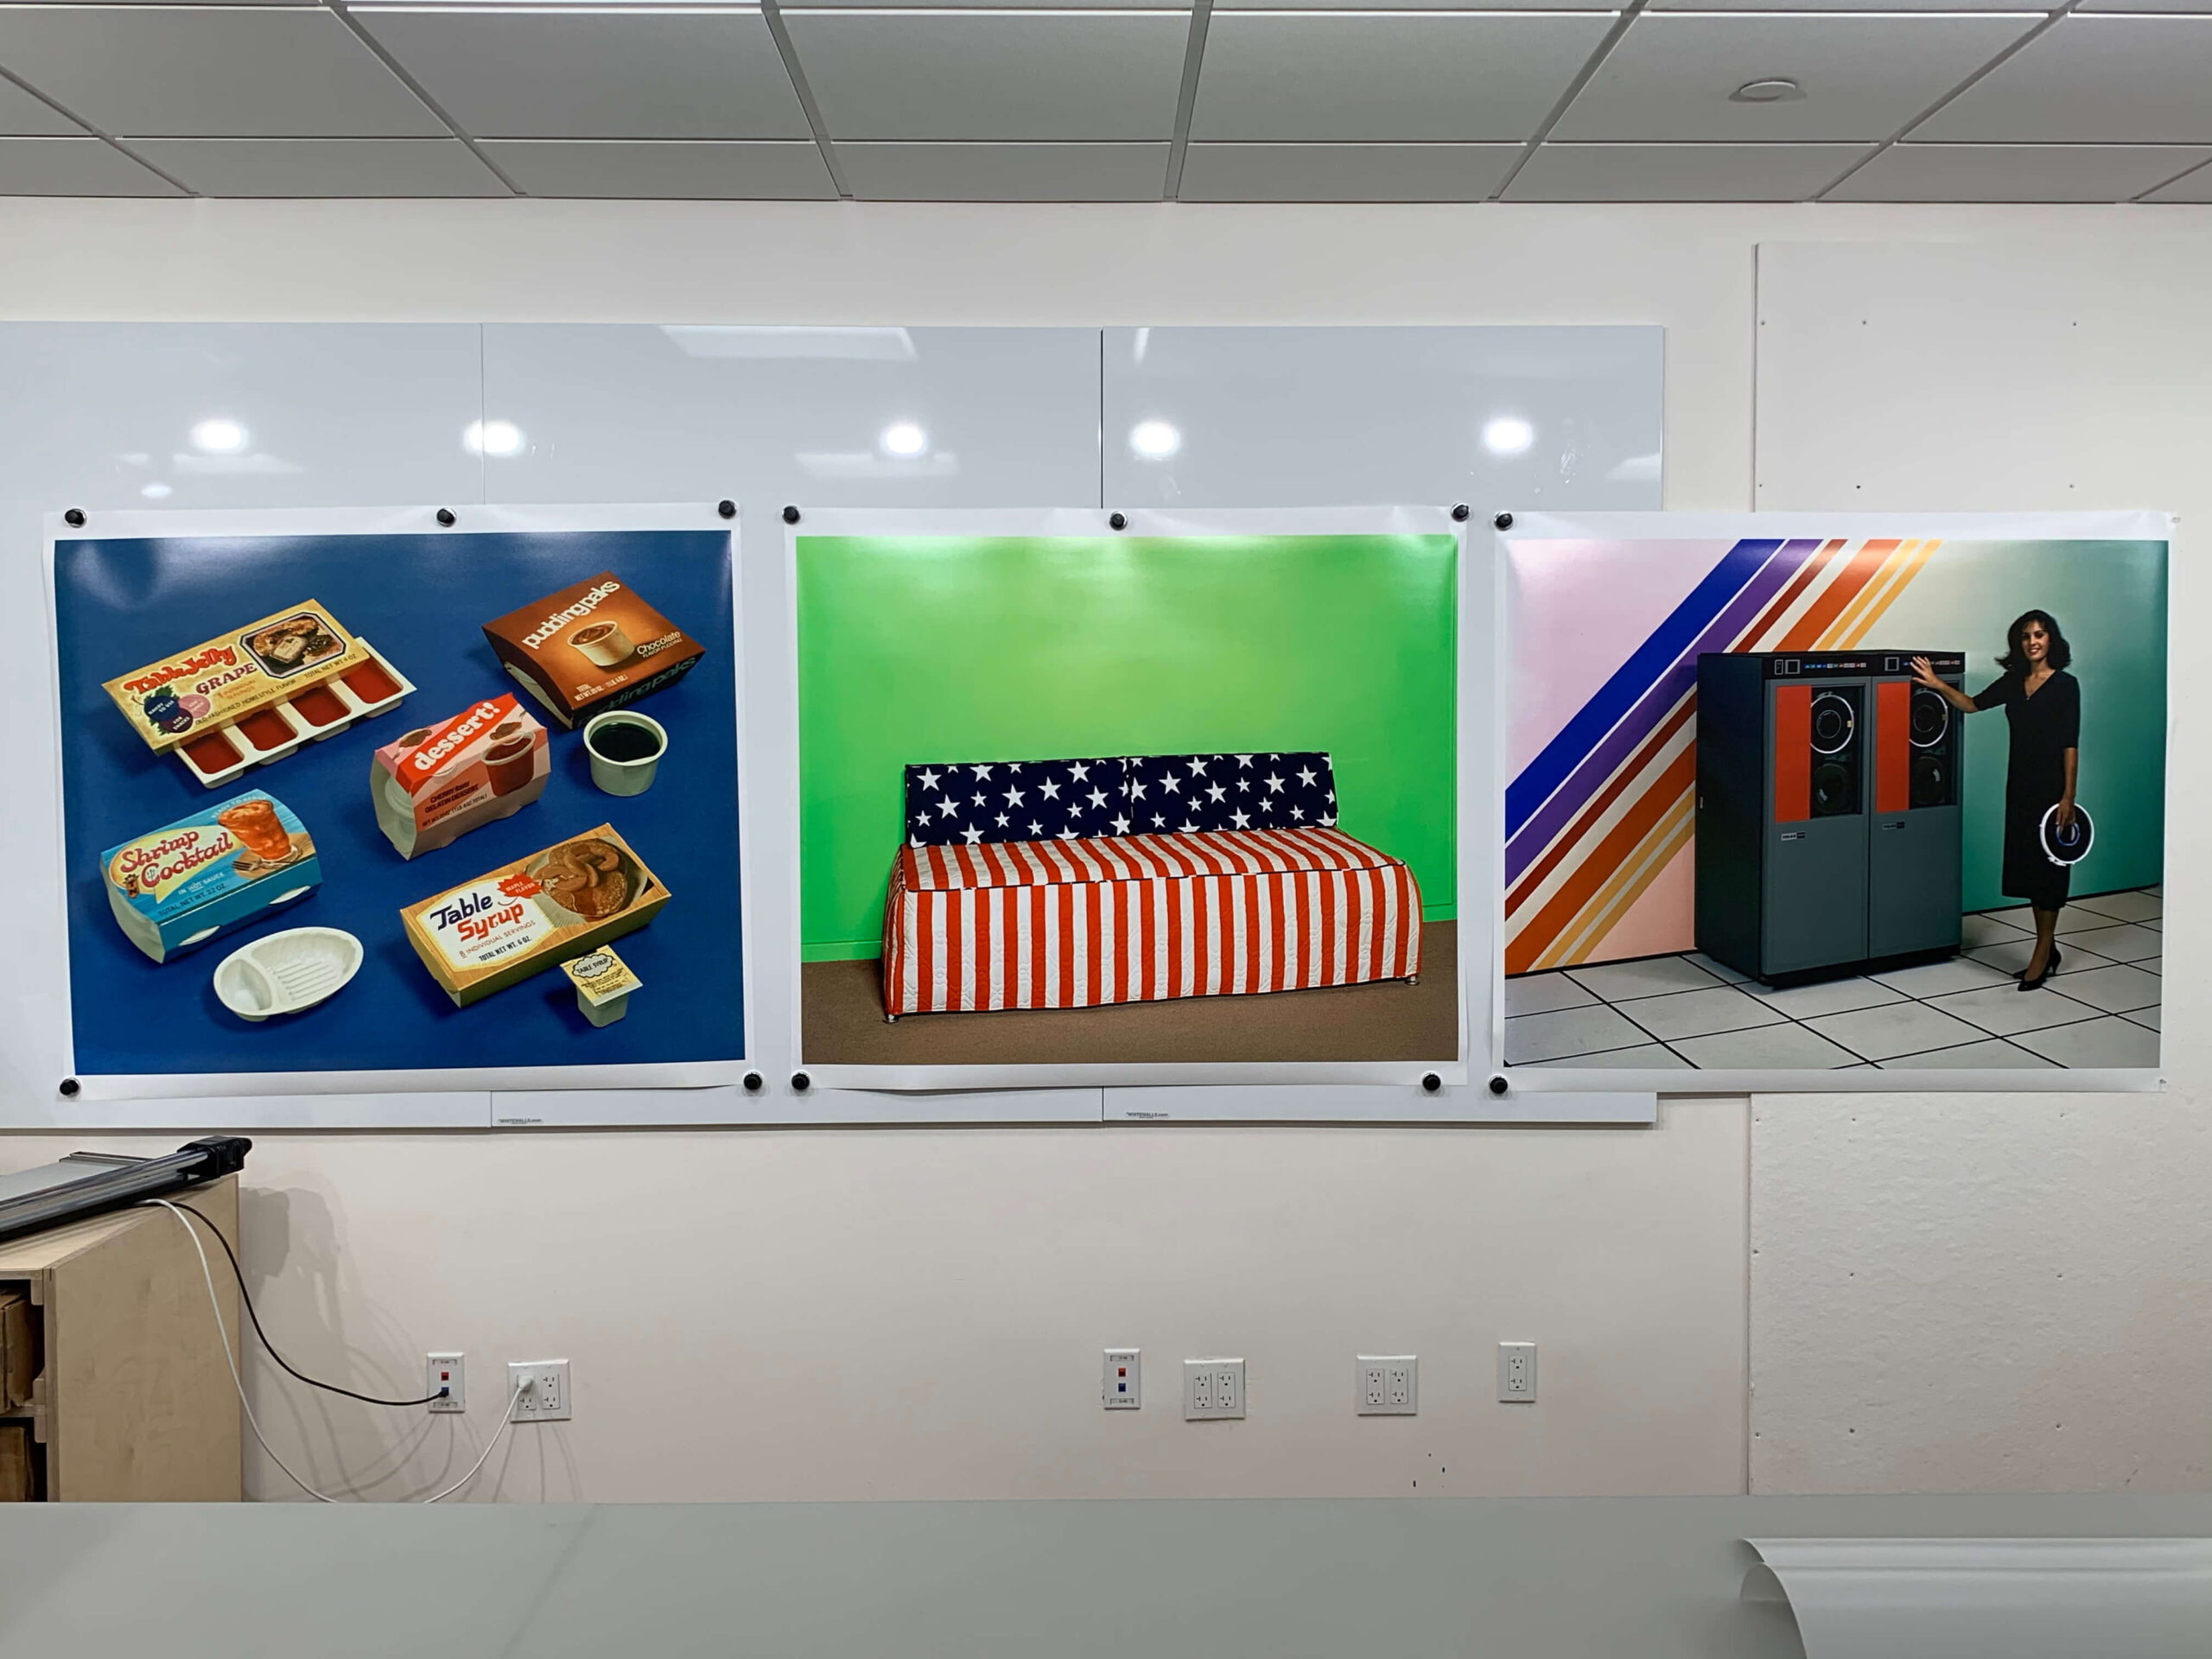 A white wall has three photos mounted on it. The first photo is of several food products with colorful packaging against a blue background. The second is of a bed with American flag bedsheets on it. There is a green screen behind the bed. The third picture is of a saleswoman presenting a large electronic device.